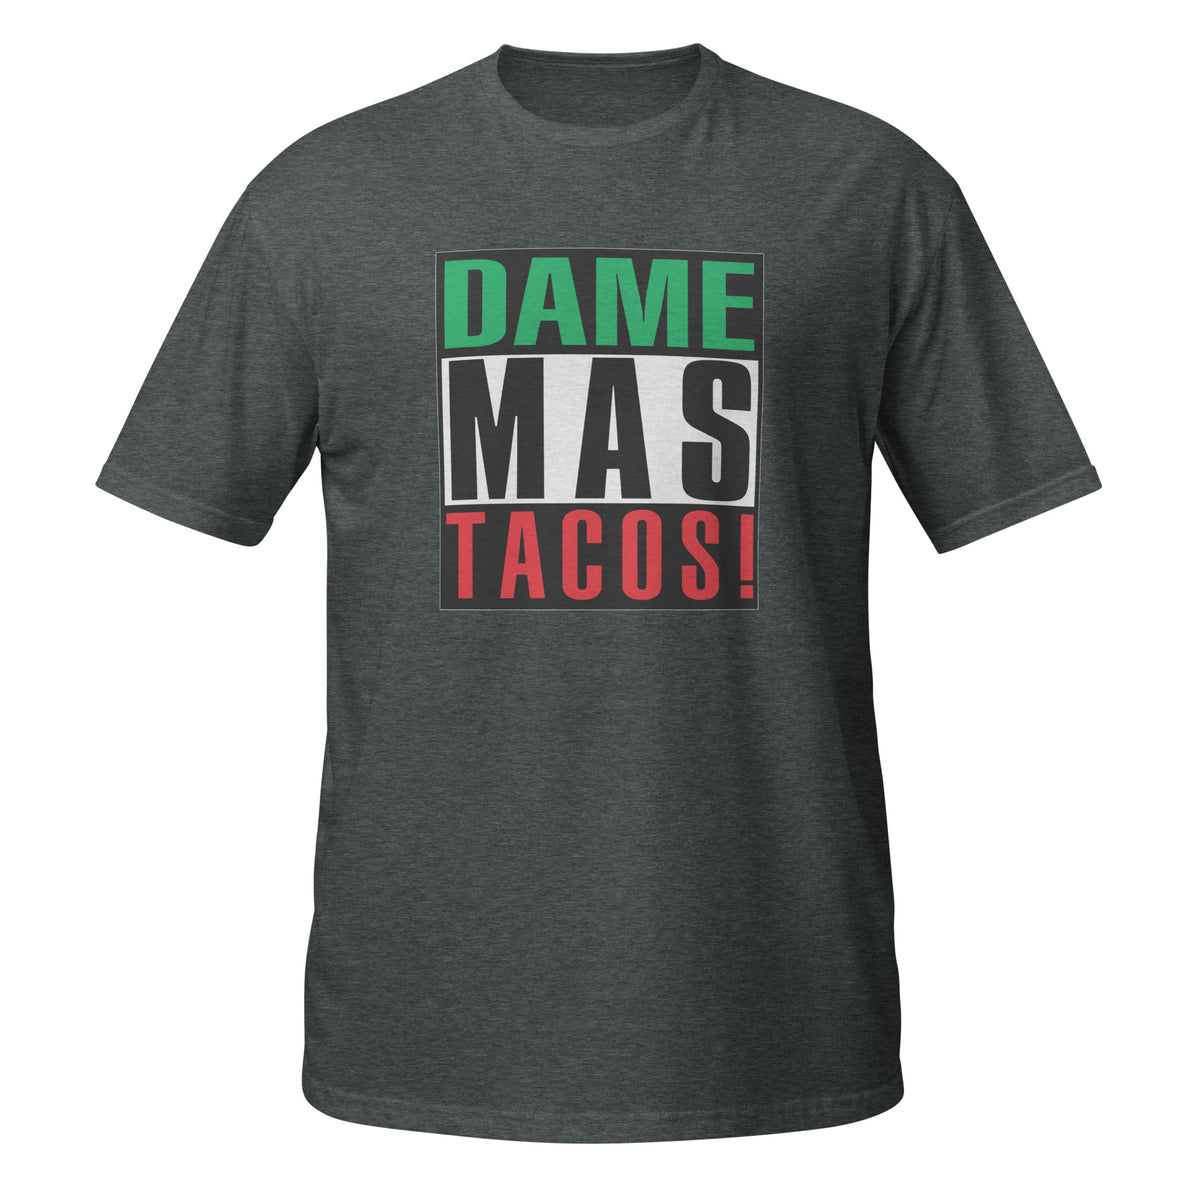 Dame Más Tacos T-Shirt (Give me more tacos)